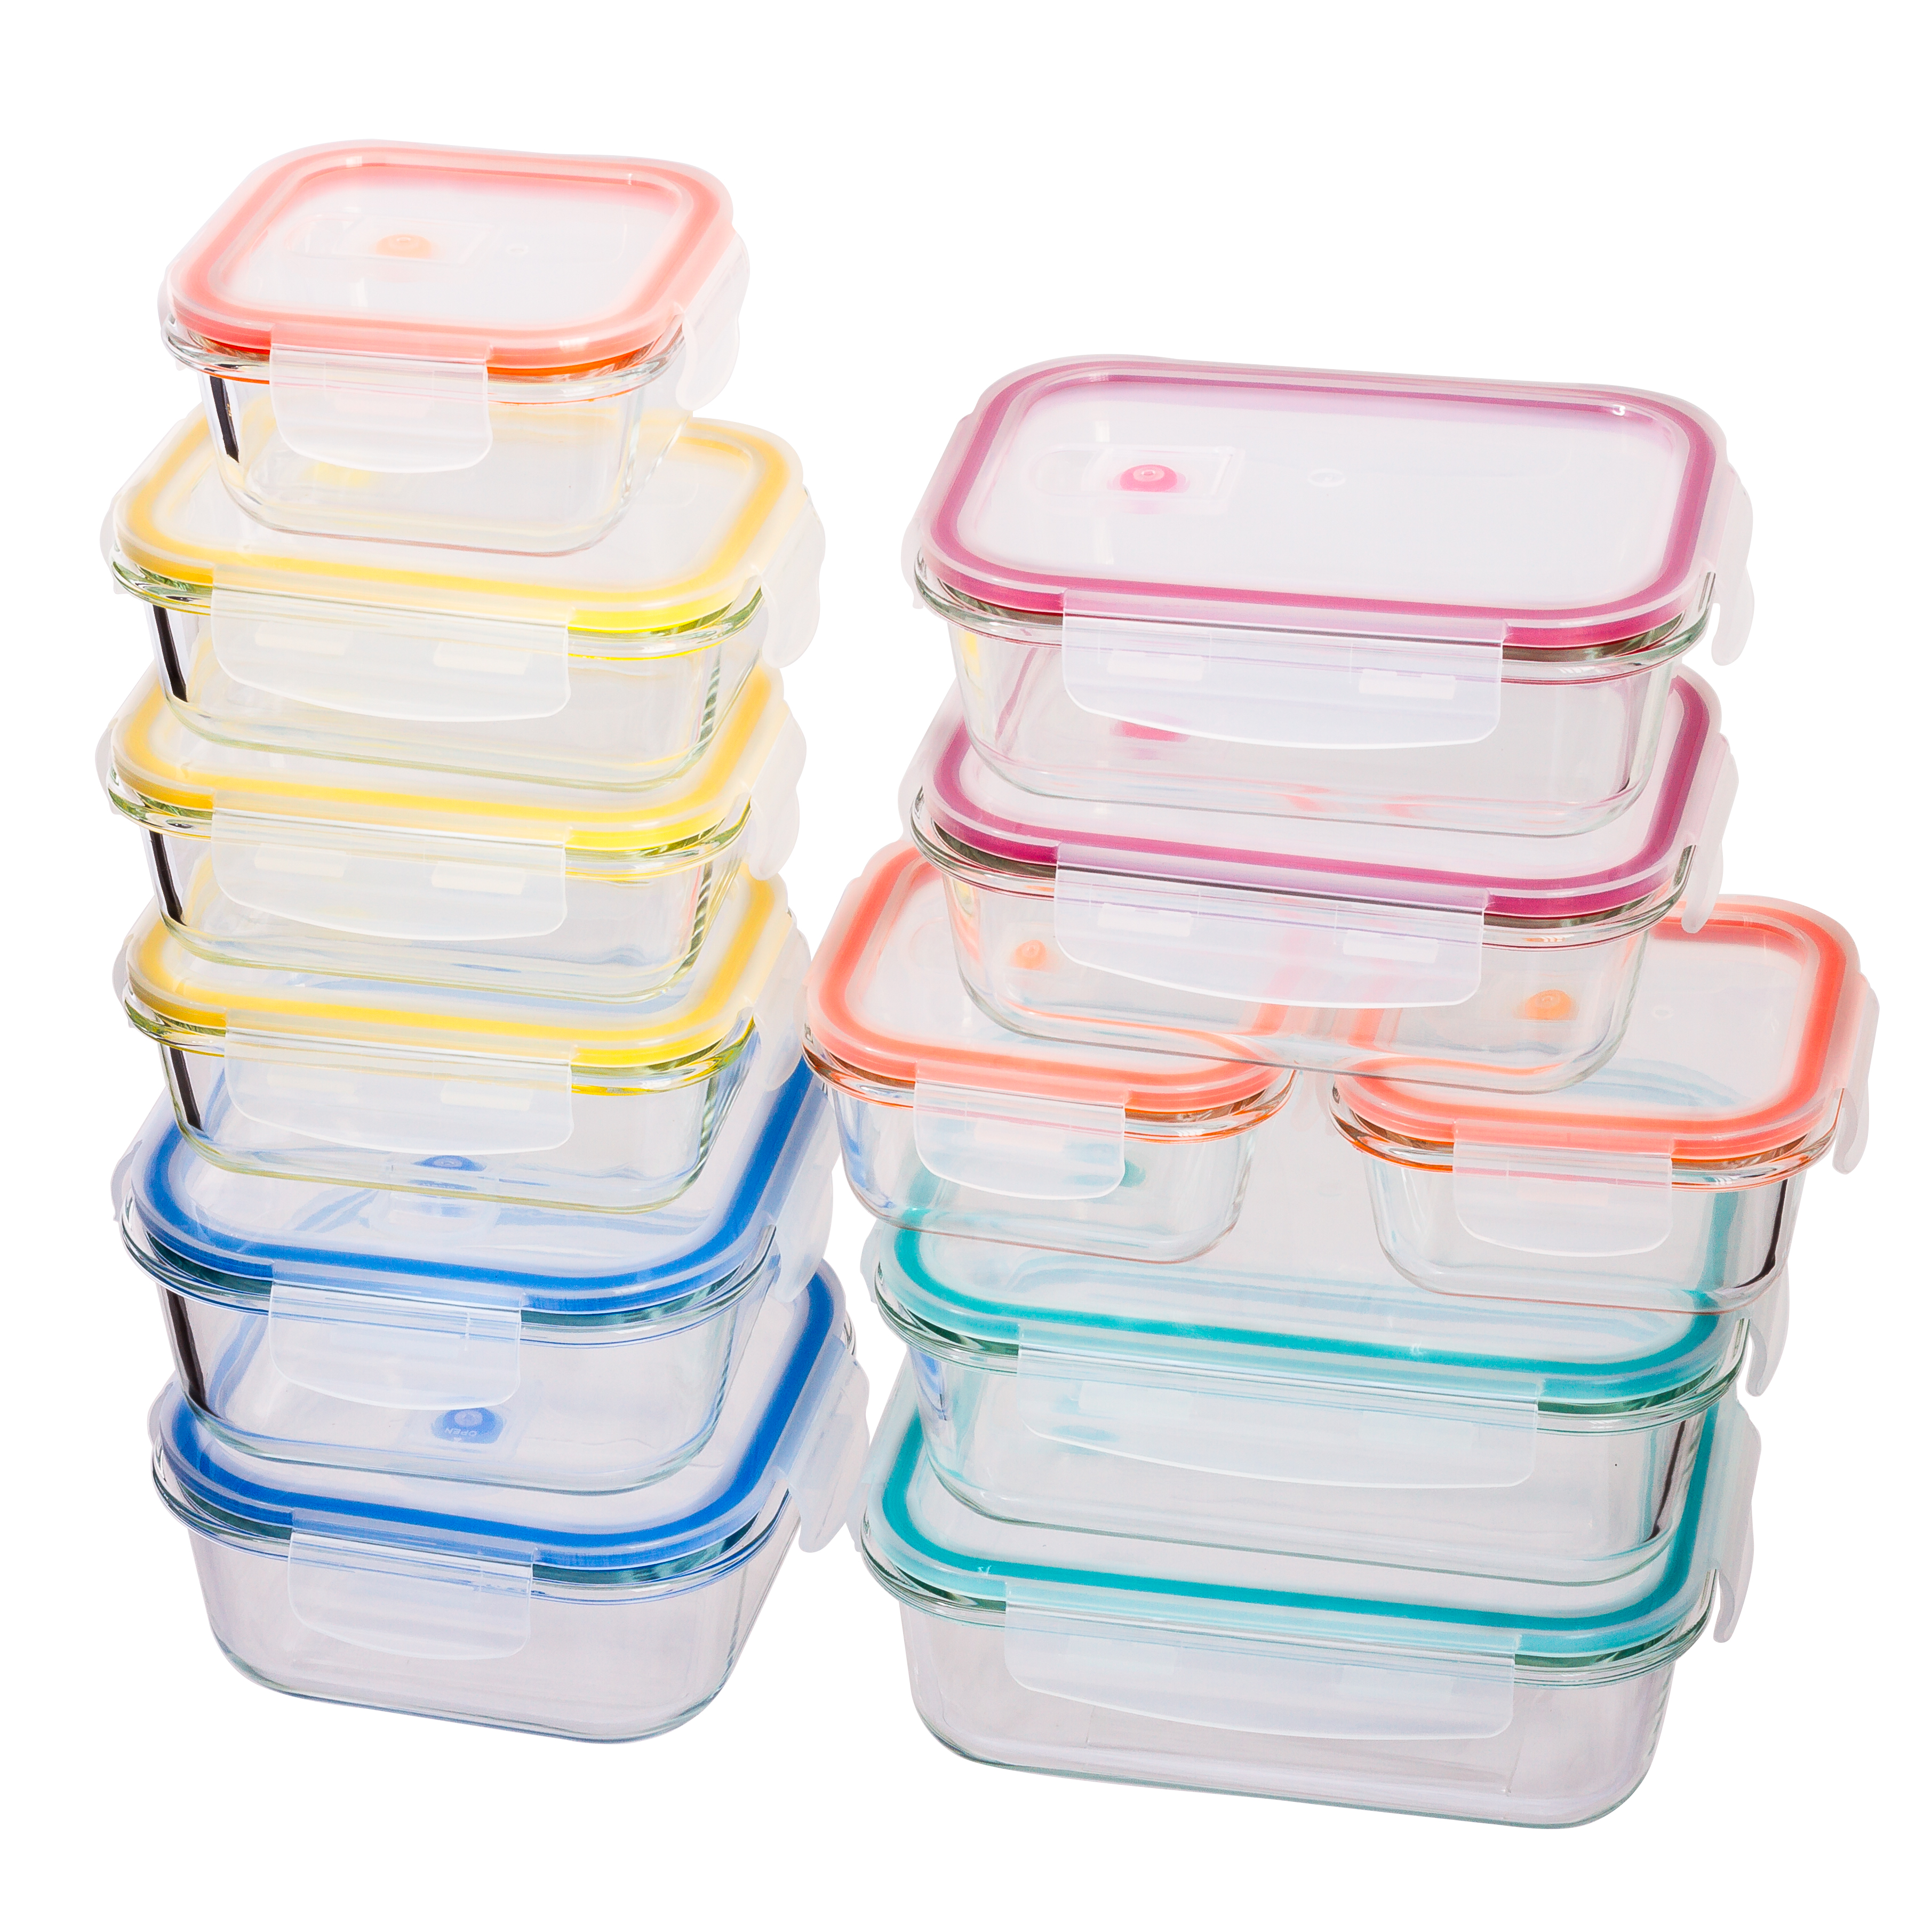 Imperial Home 24 pcs. Glass Meal Prep Storage Container Set W/ Snap Locking Lid - image 2 of 8